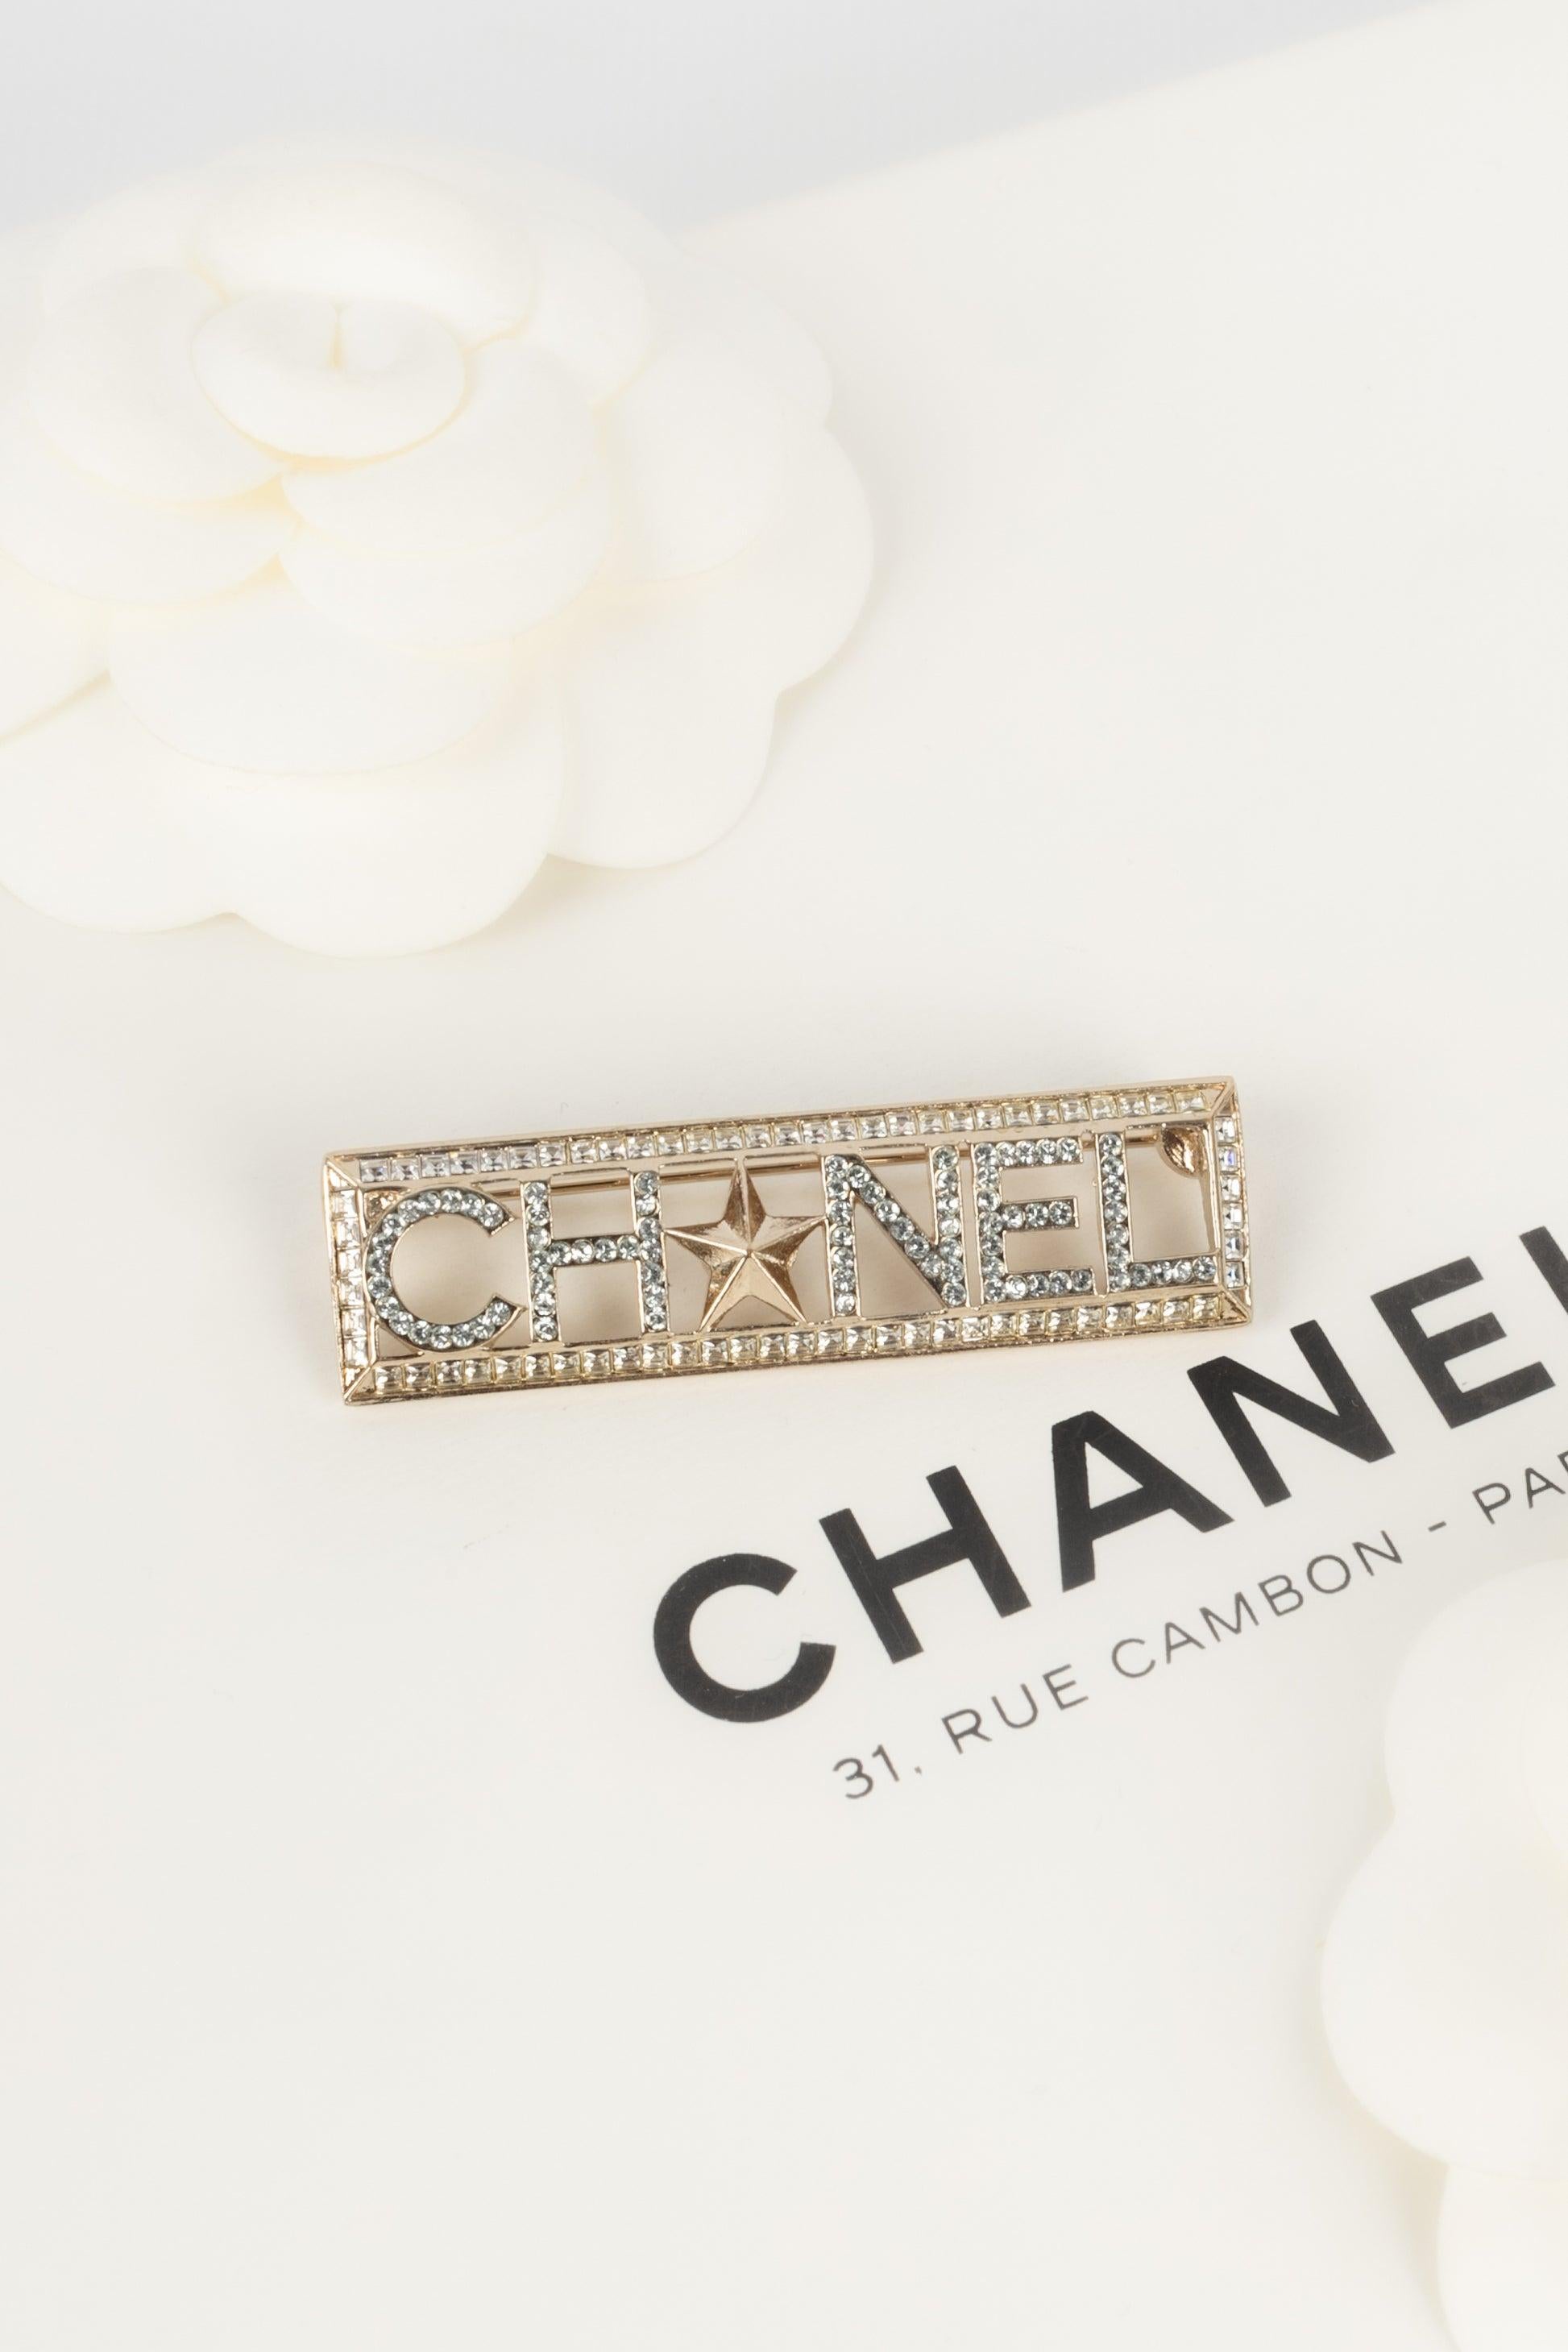 Chanel Champagne Metal Openwork Brooch Ornamented with Rhinestones, 2018 For Sale 1